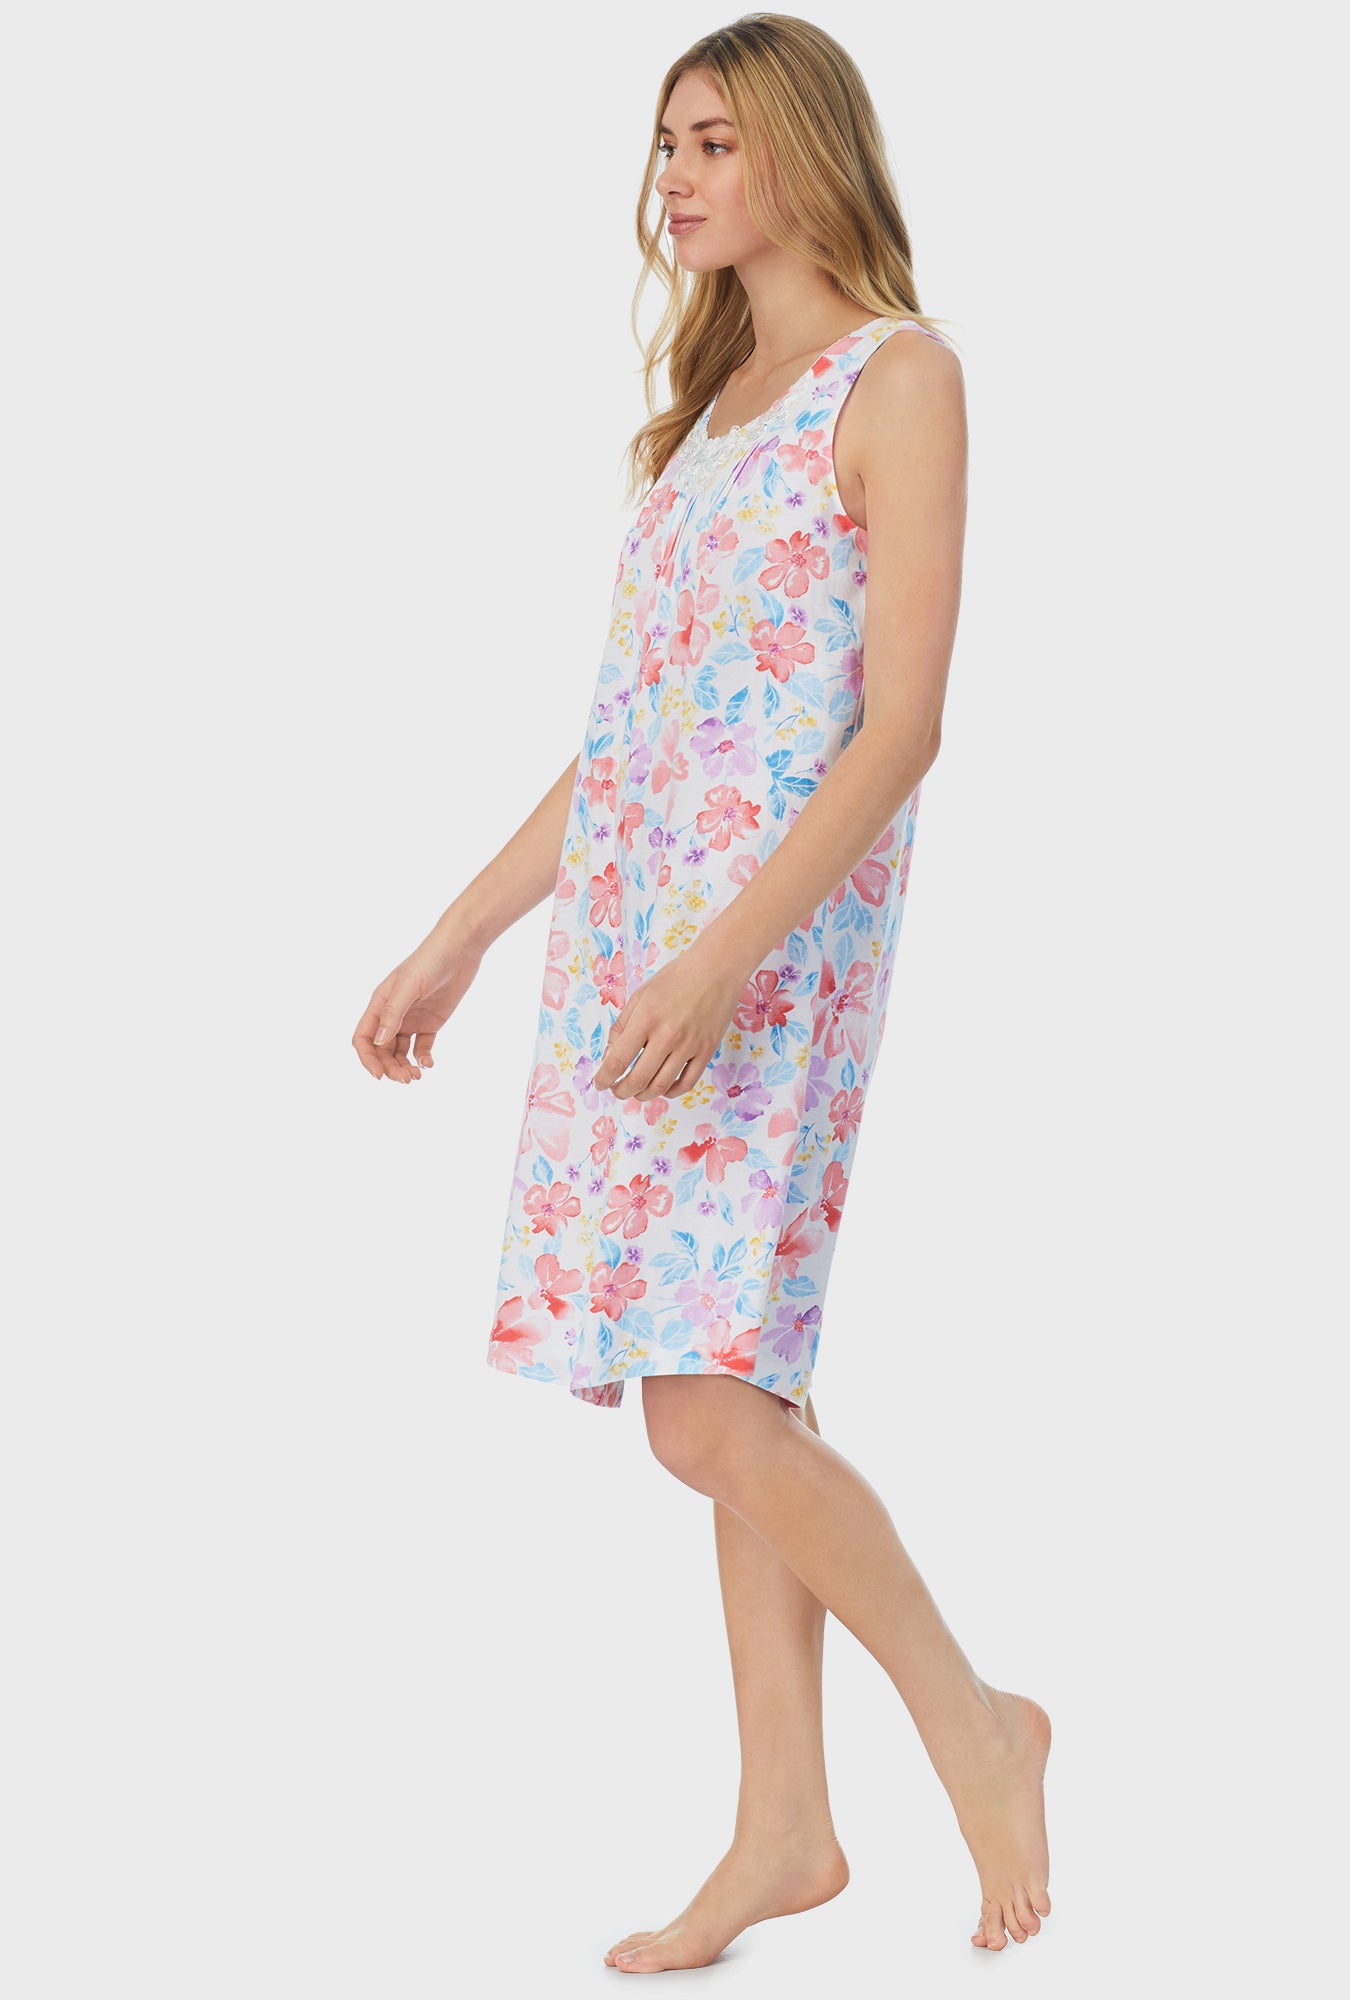 A lady wearing white Waltz Nightgown with Tropical Blooms print